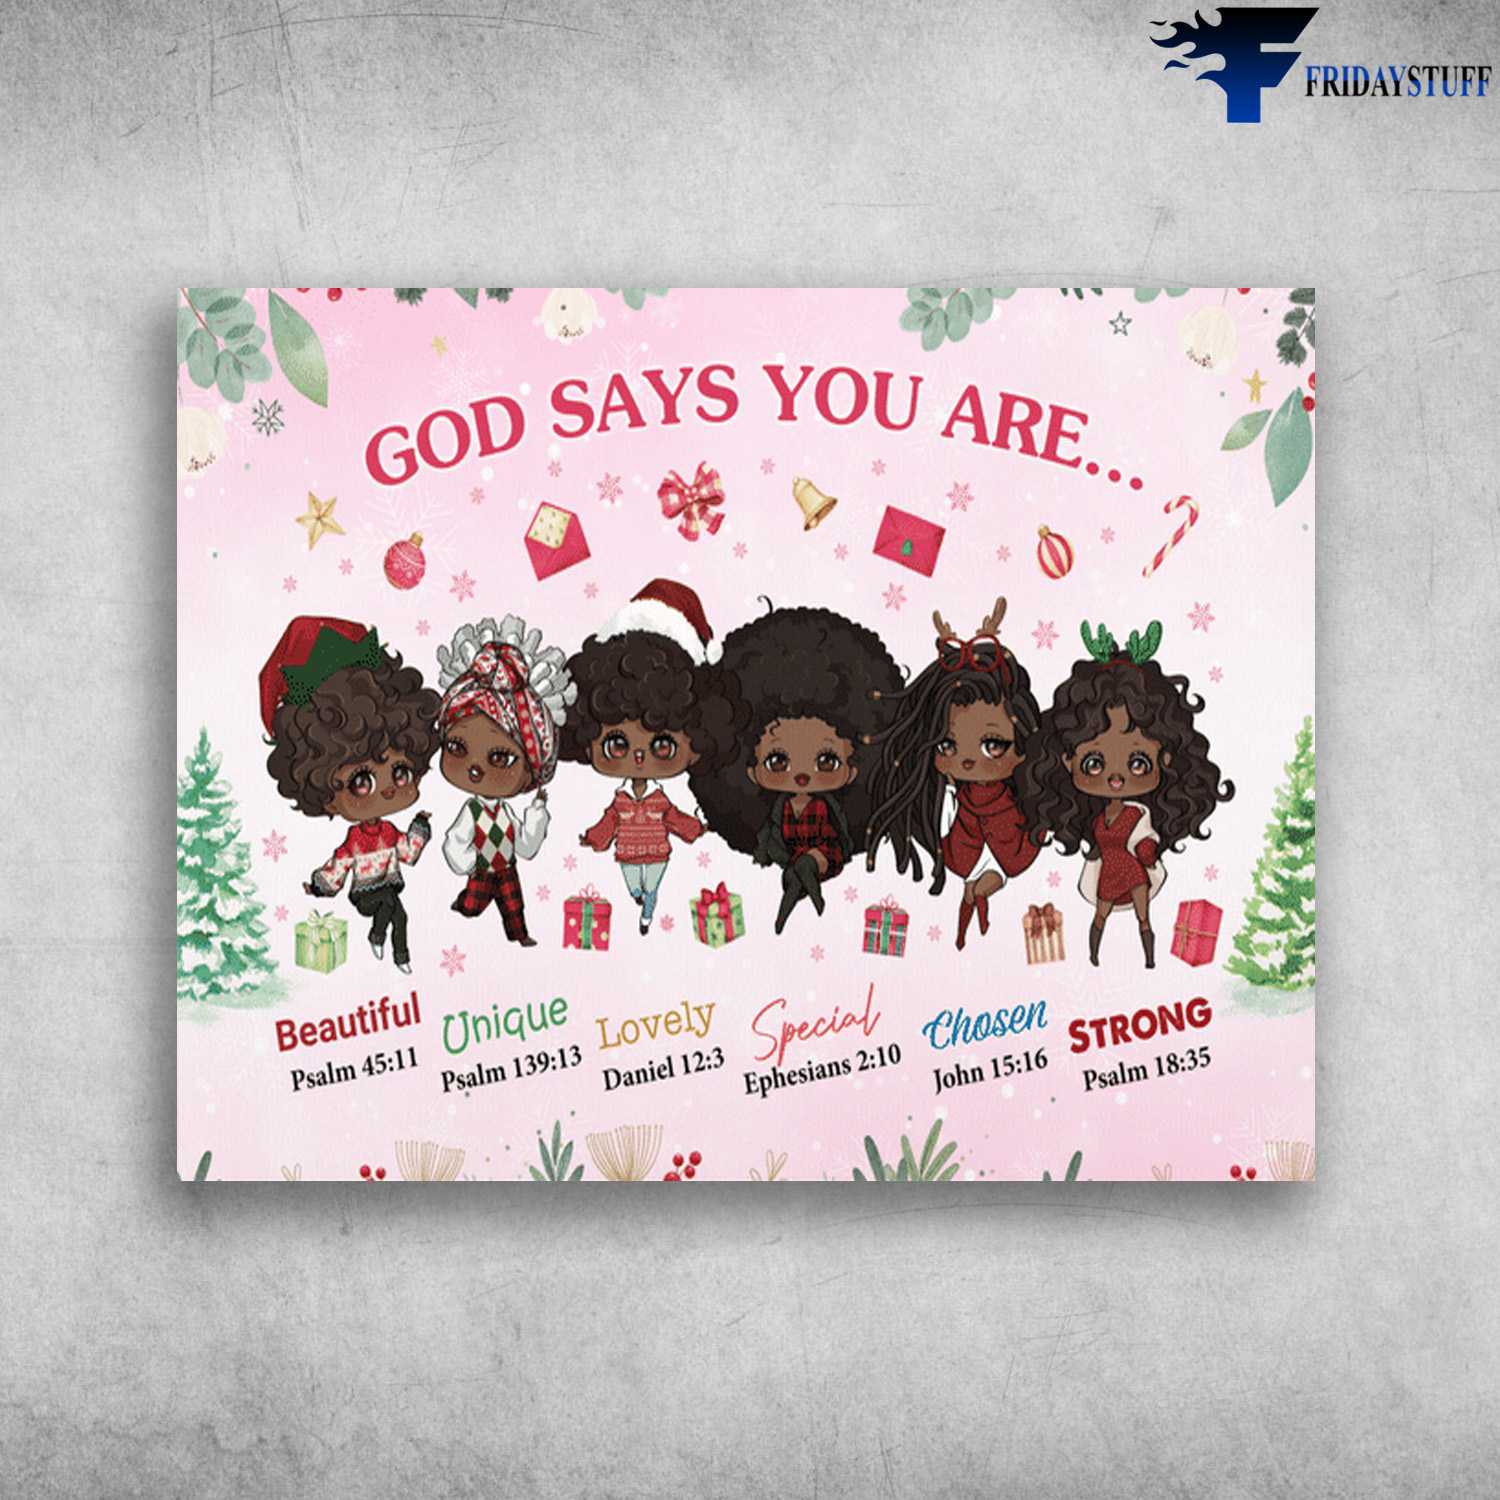 Black Girl Christmas, Christmas Poster, God Says You Are, Beautiful, Unique, Lovely, Special, Chosen, Strong